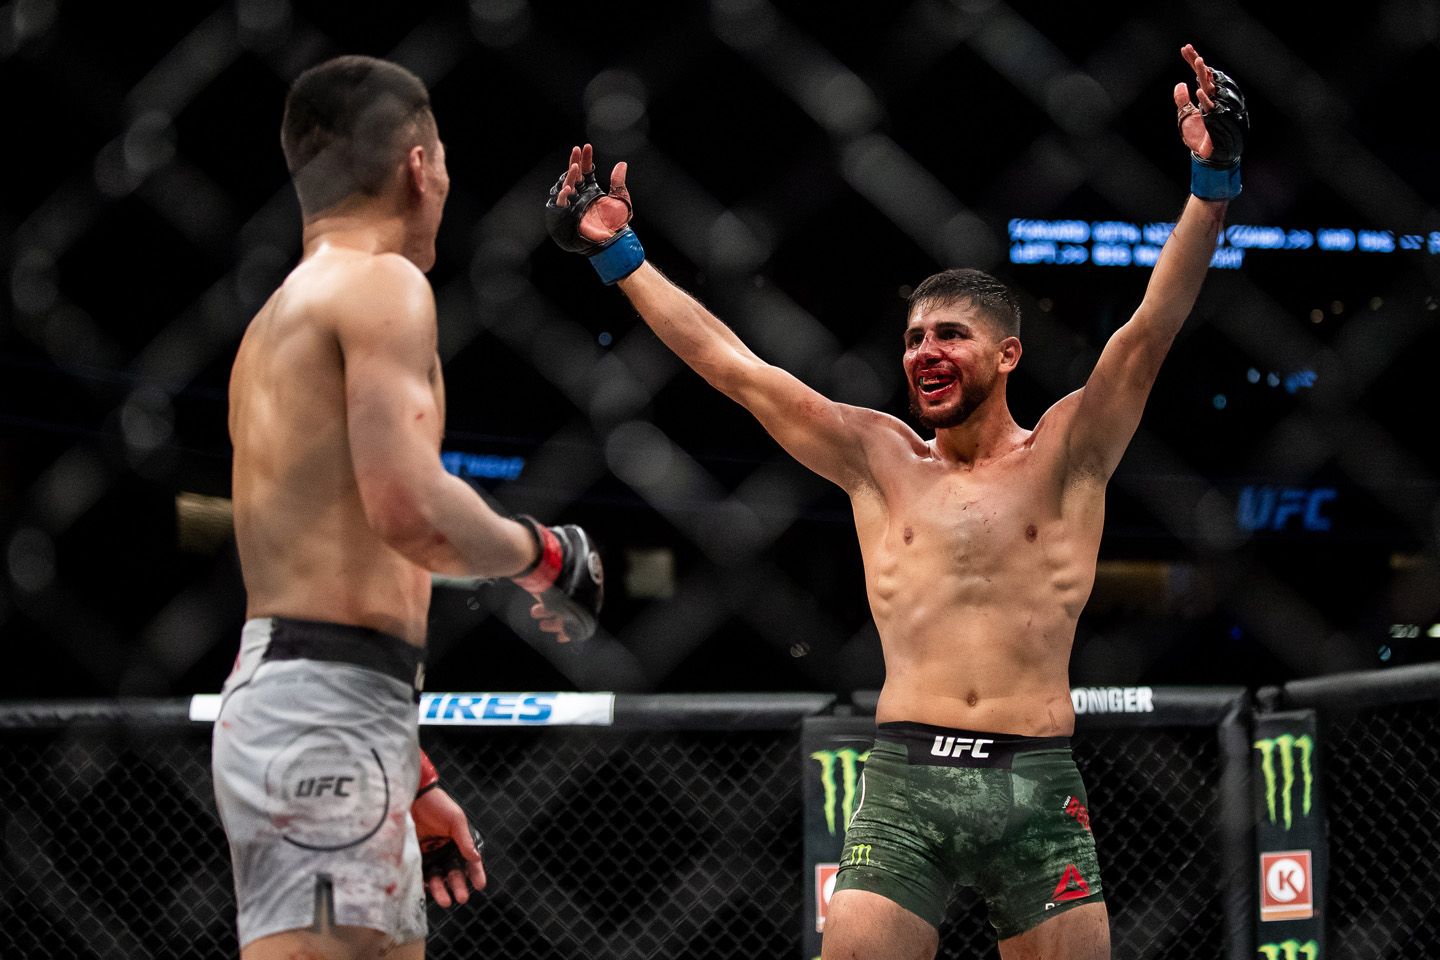 Monster Energy’s Yair Rodriguez Knocks Out Chang Sung Jung In the Main Event in the Last Second of Epic “Fight of the Year” Contender